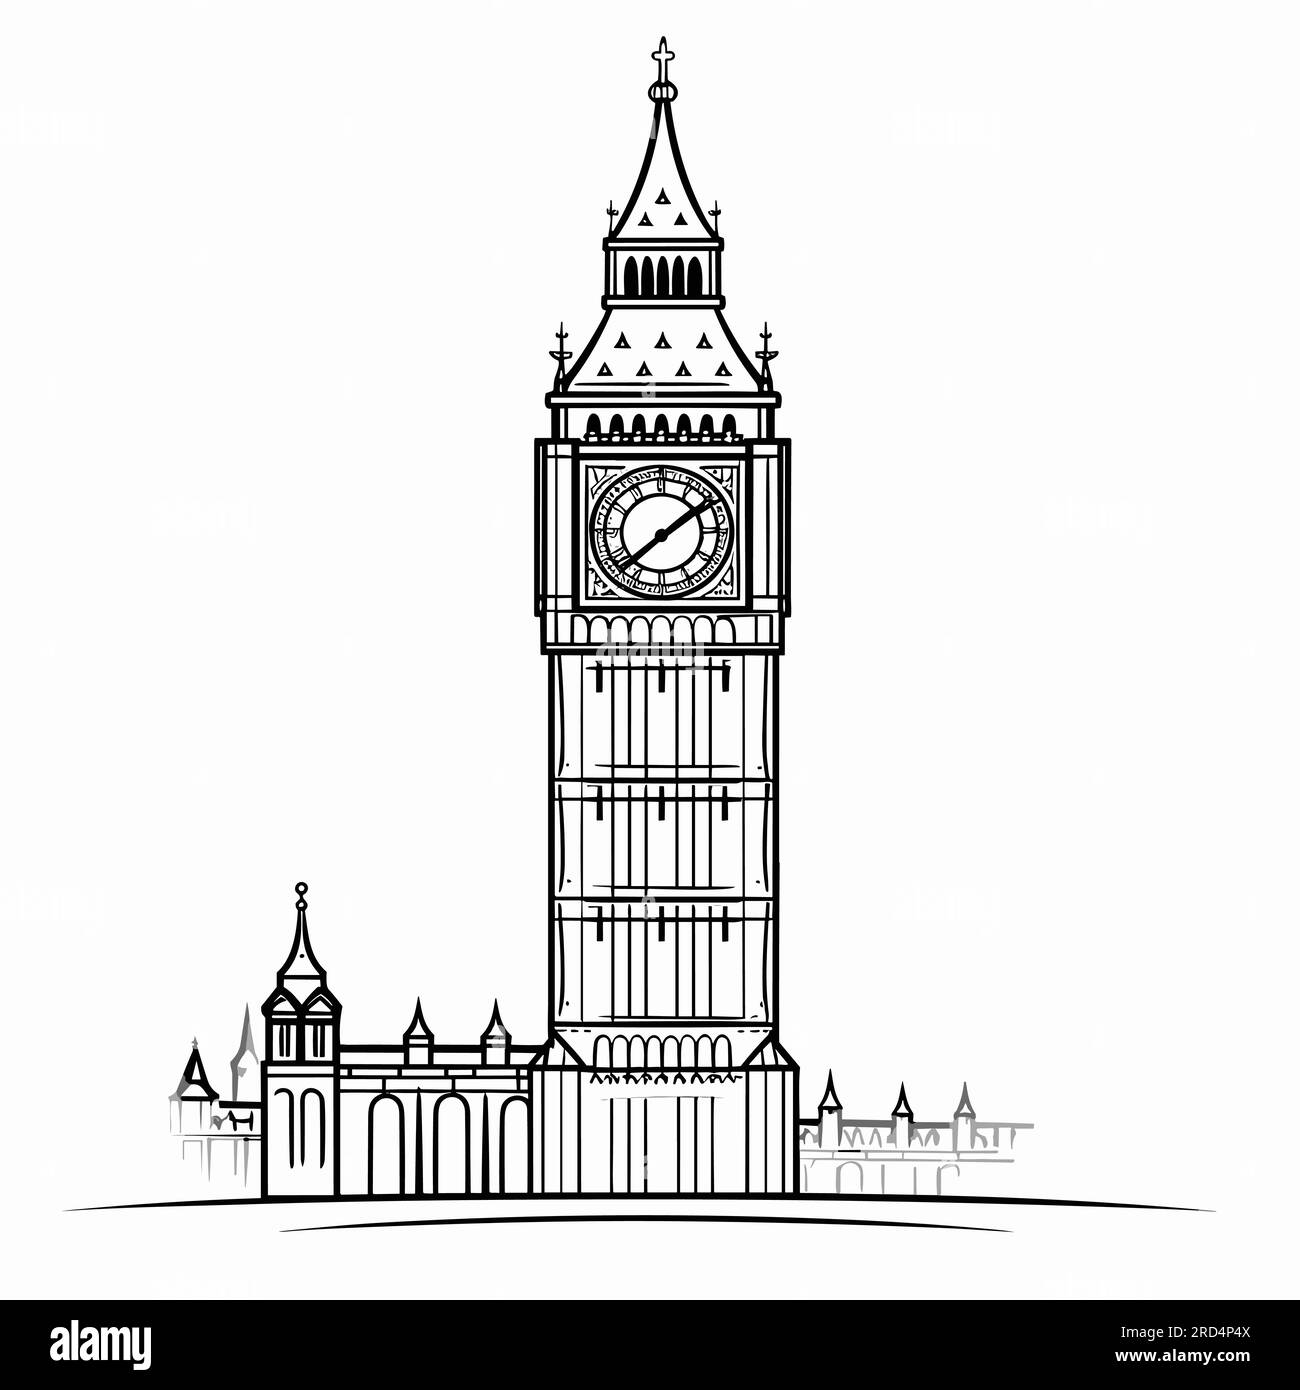 How to Draw Big Ben London: Realistic Pencil Drawing - YouTube